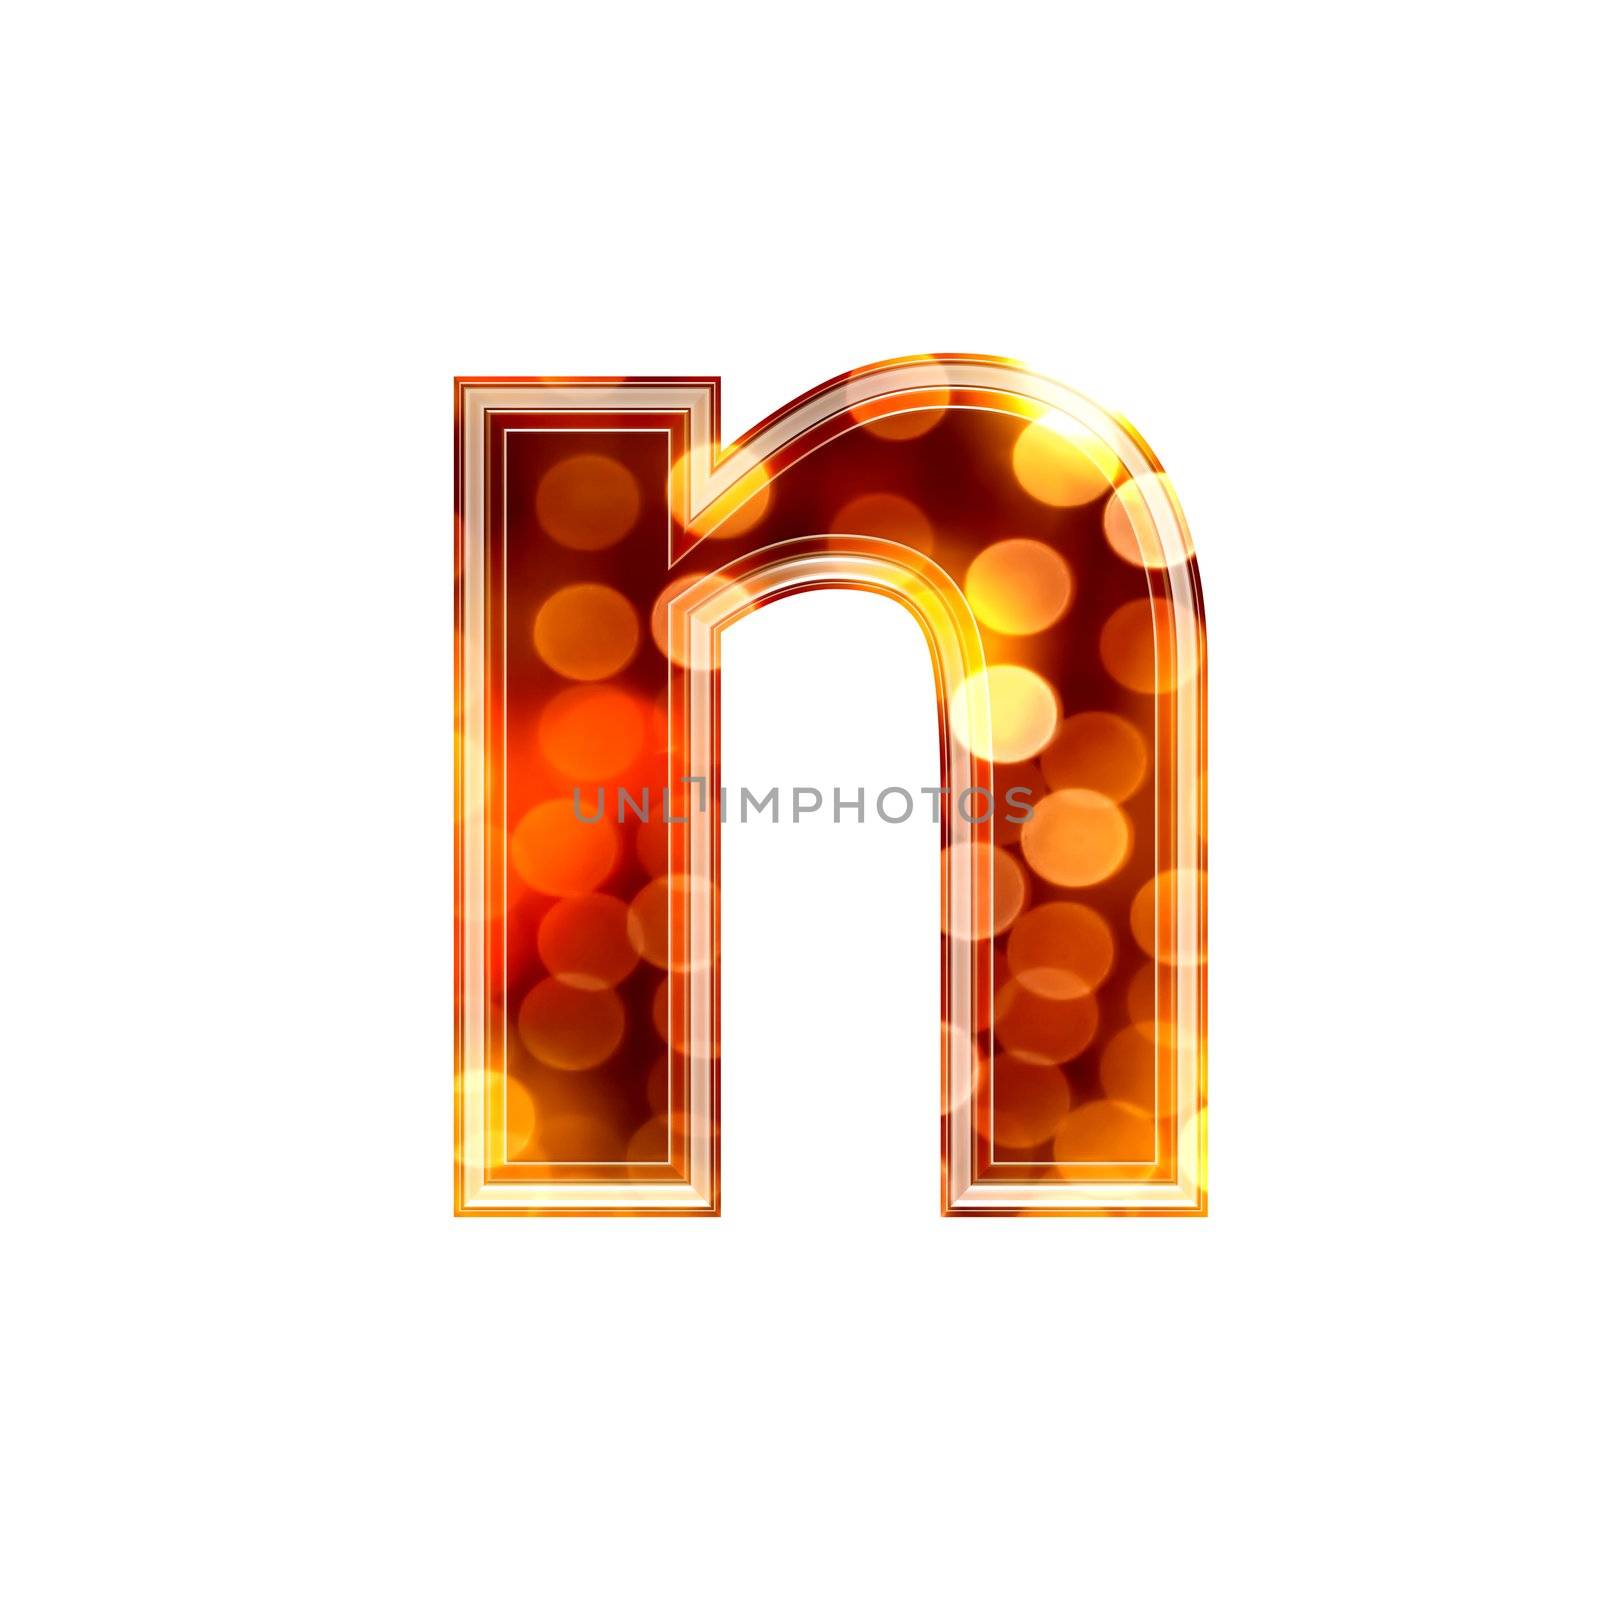 3d letter with glowing lights texture - n by chrisroll